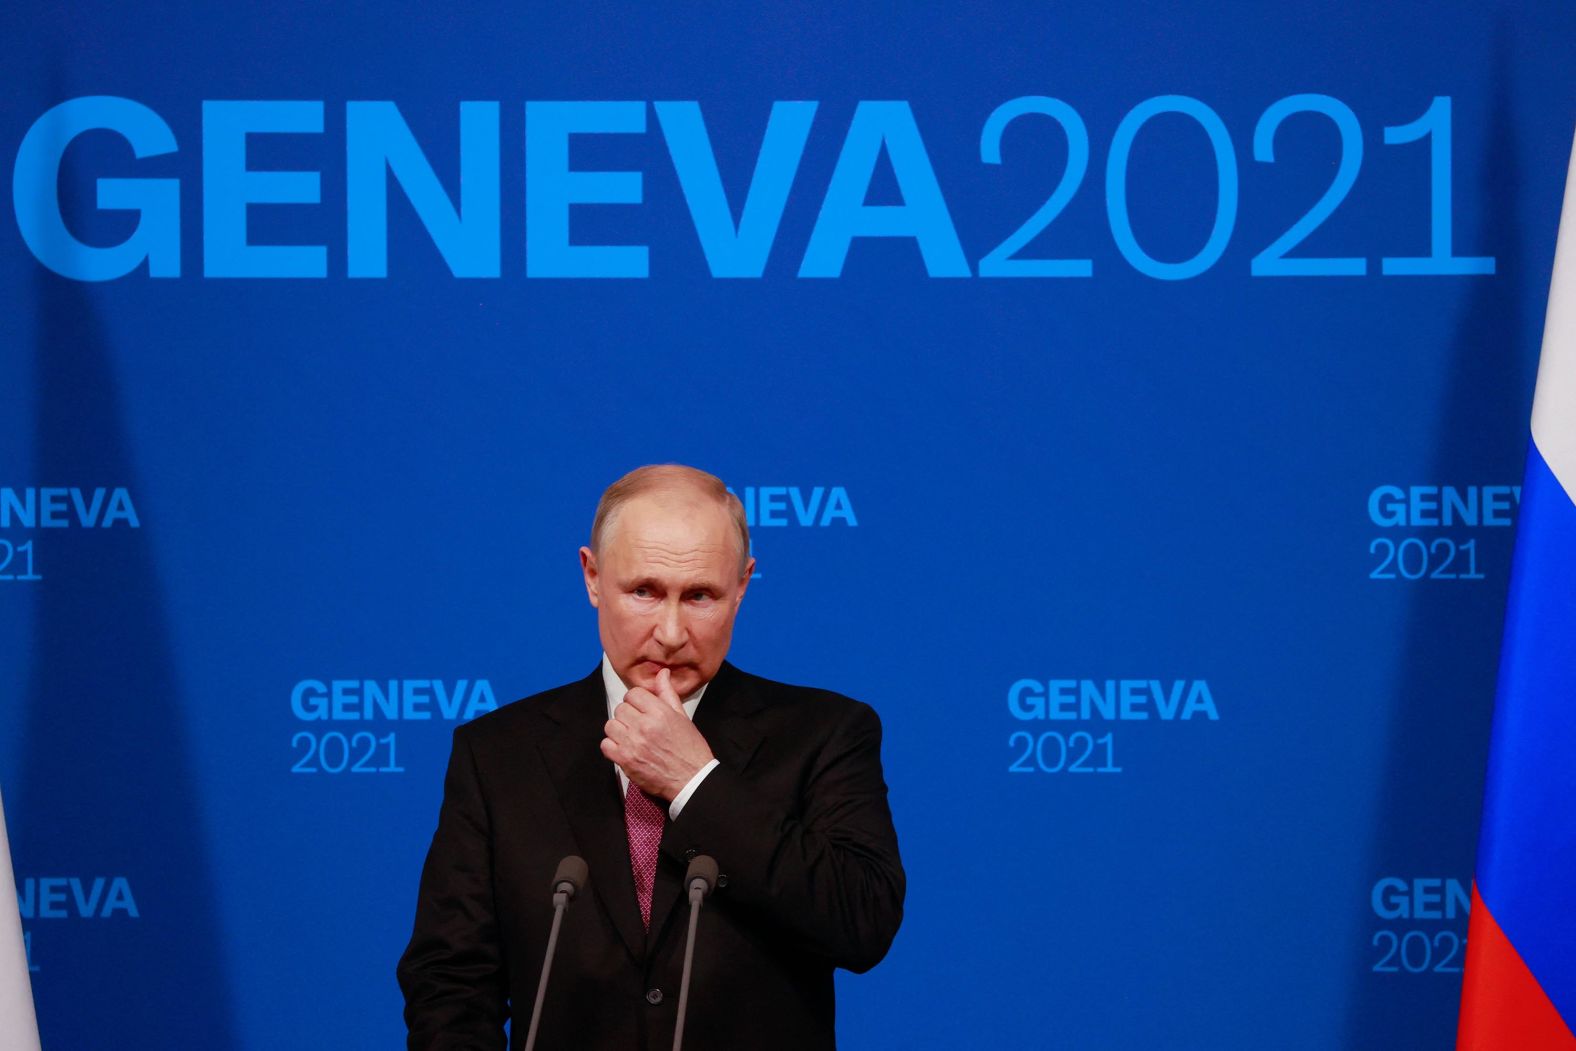 Putin said the United States and Russia are going to begin consultations on cybersecurity. "We believe that the cyberspace is extraordinarily important. In general, and in particular for the US, and to the same extent for Russia," he said.